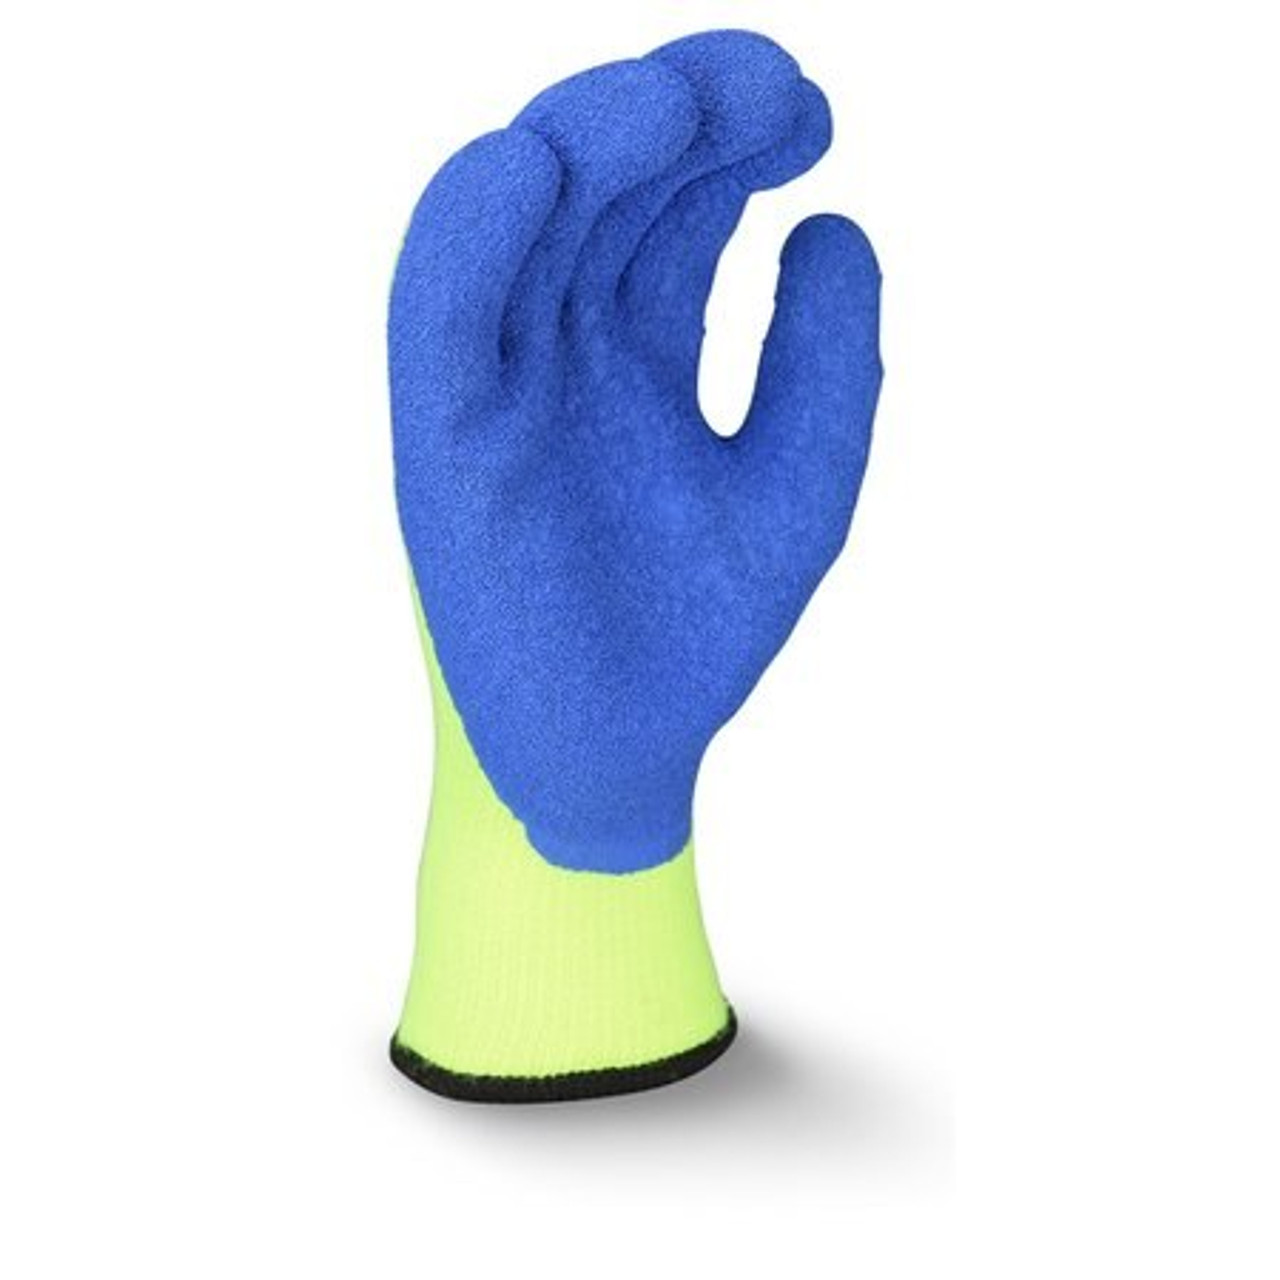 Hi-Vis Cold Protection Cut-Resistant Coated Gloves, Acrylic/Polyester Lining ( 12 PAIRS)